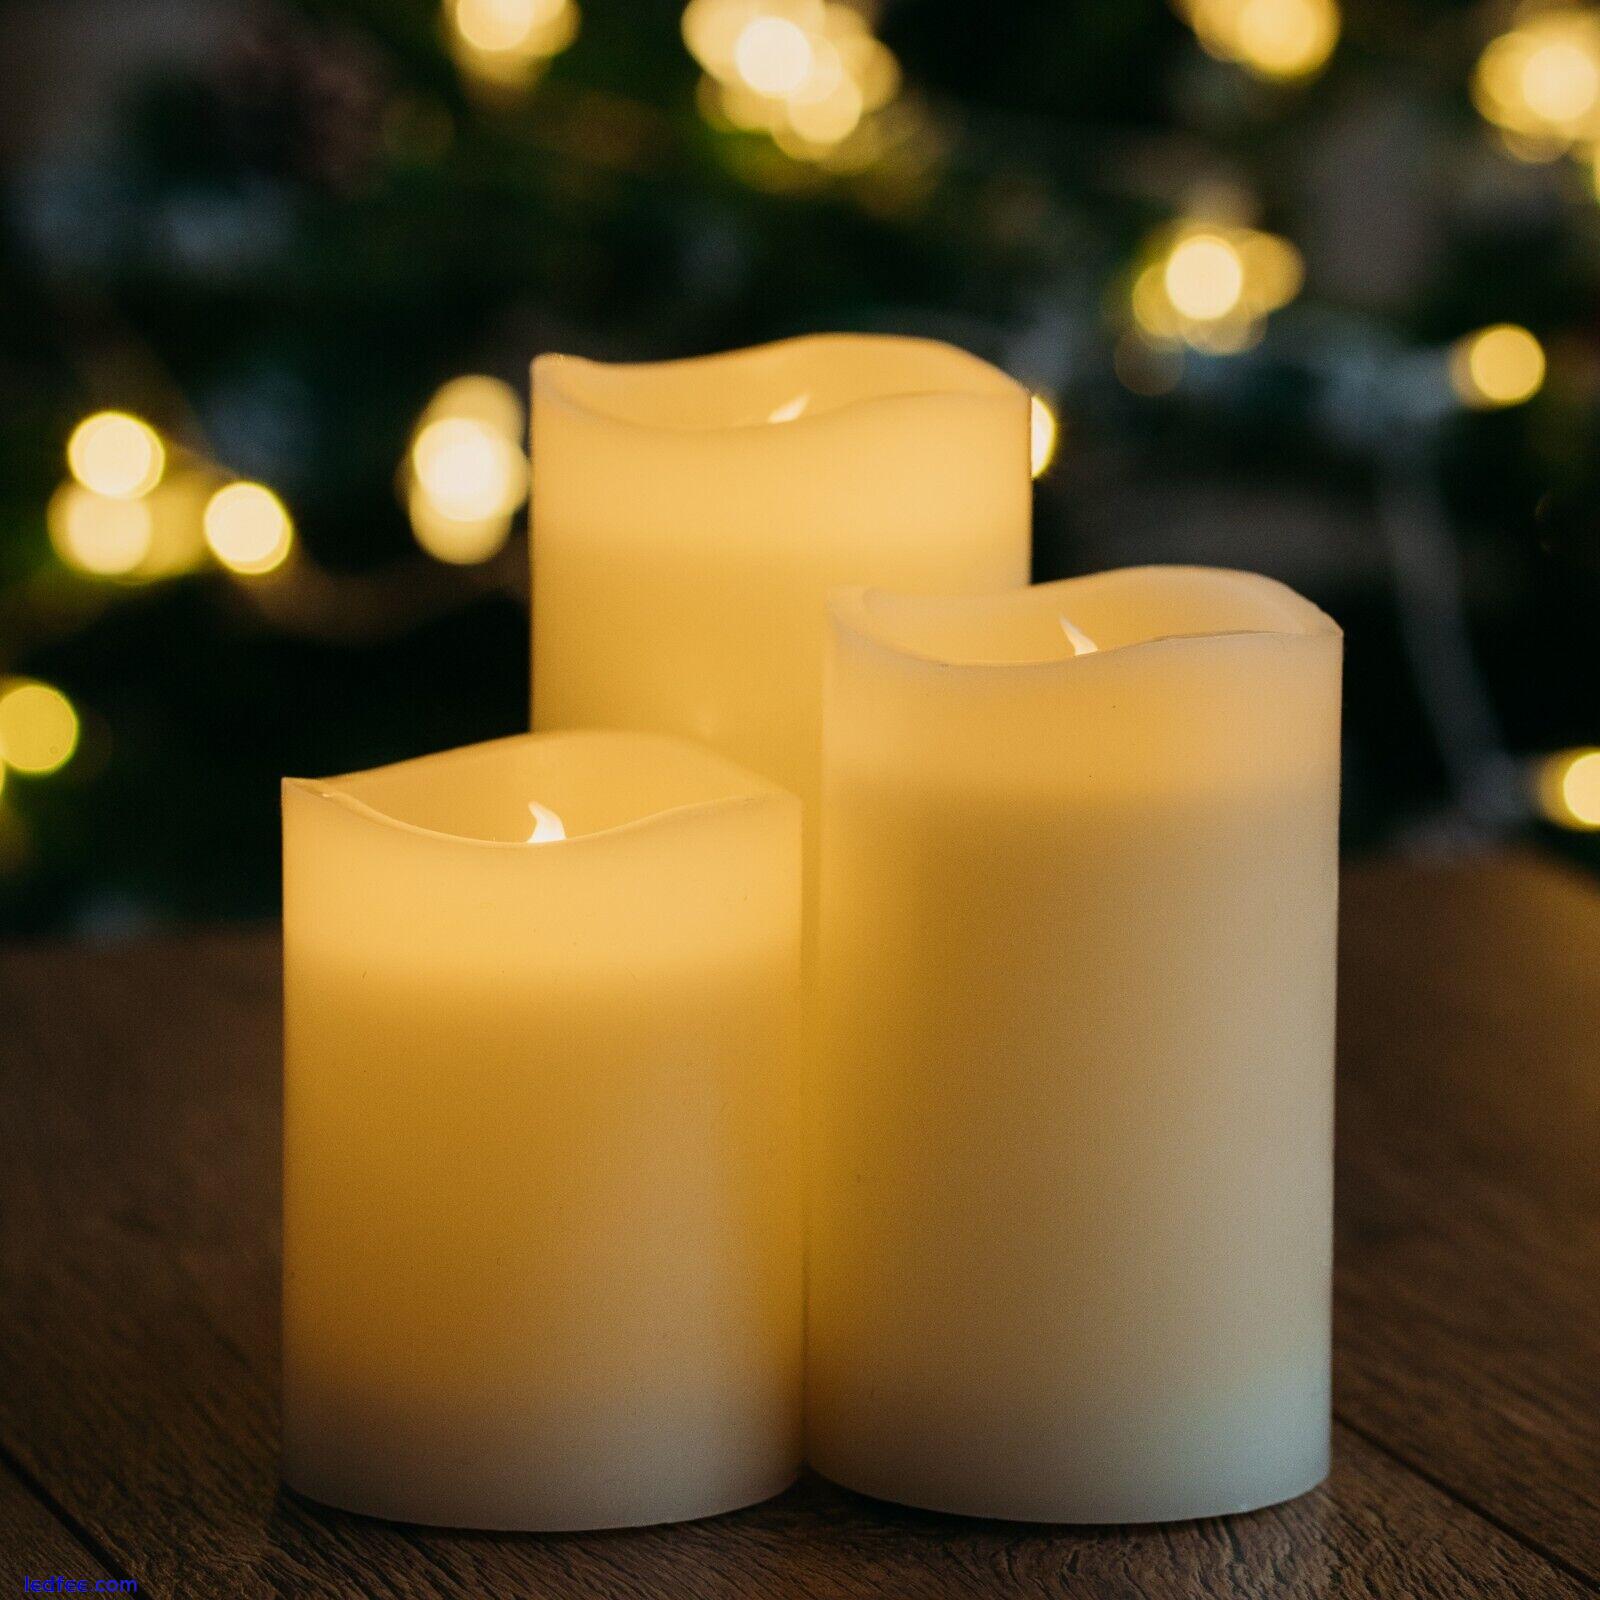 3-Piece Flameless Pillar Candle Set – Flickering LED Candles - Battery Operated 3 